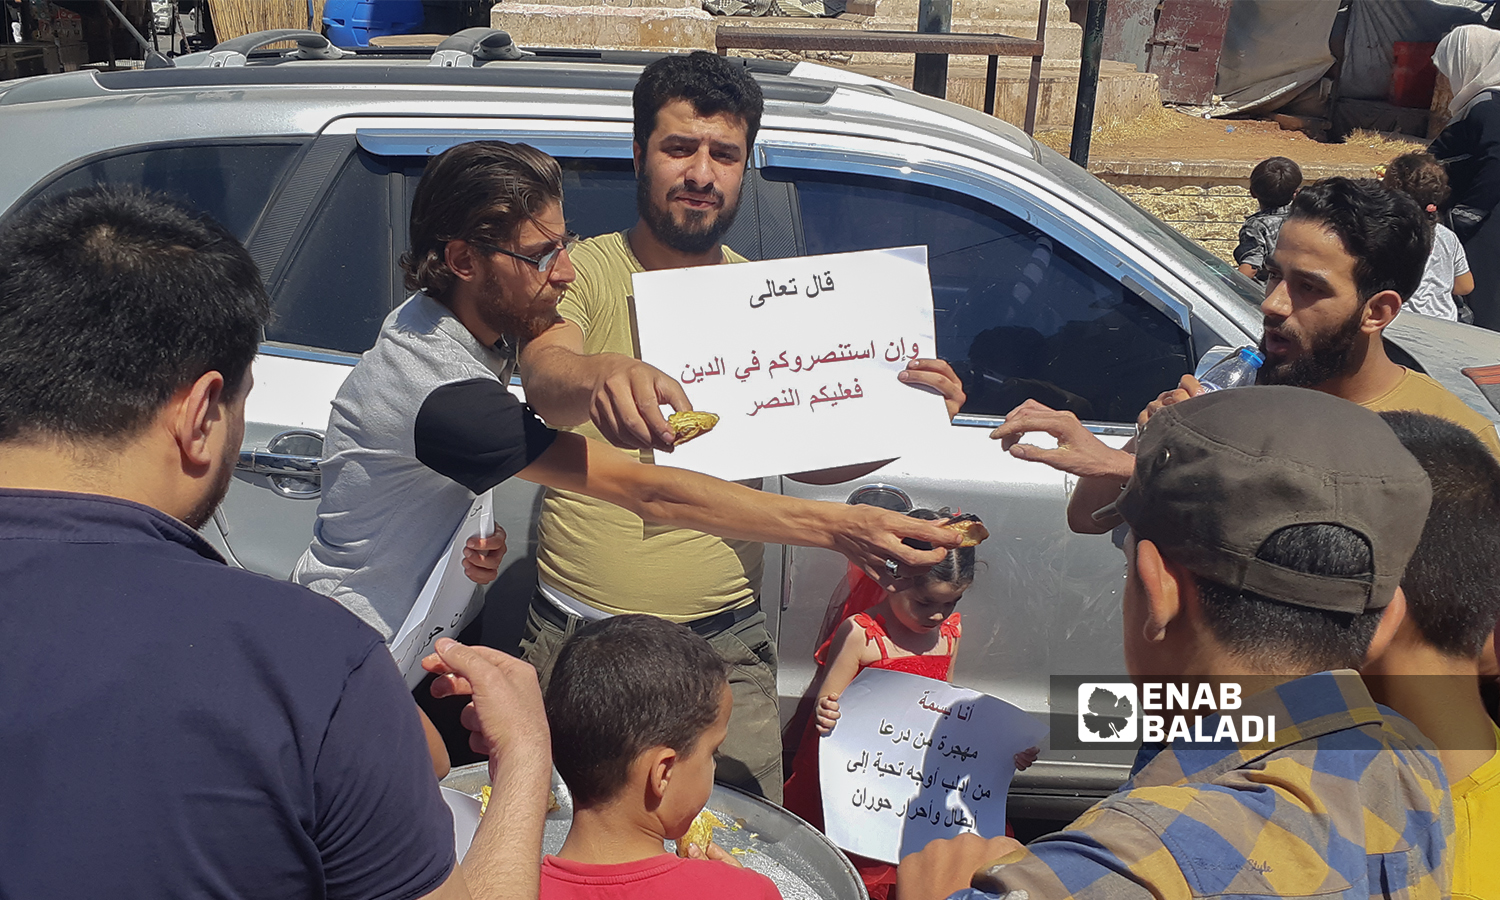 A group of young men carrying banners in solidarity with Daraa residents, and offering sweet desserts after the military checkpoints of the Syrian regime were erected - 29 July 2021 (Enab Baladi-Anas al-Khouli)
